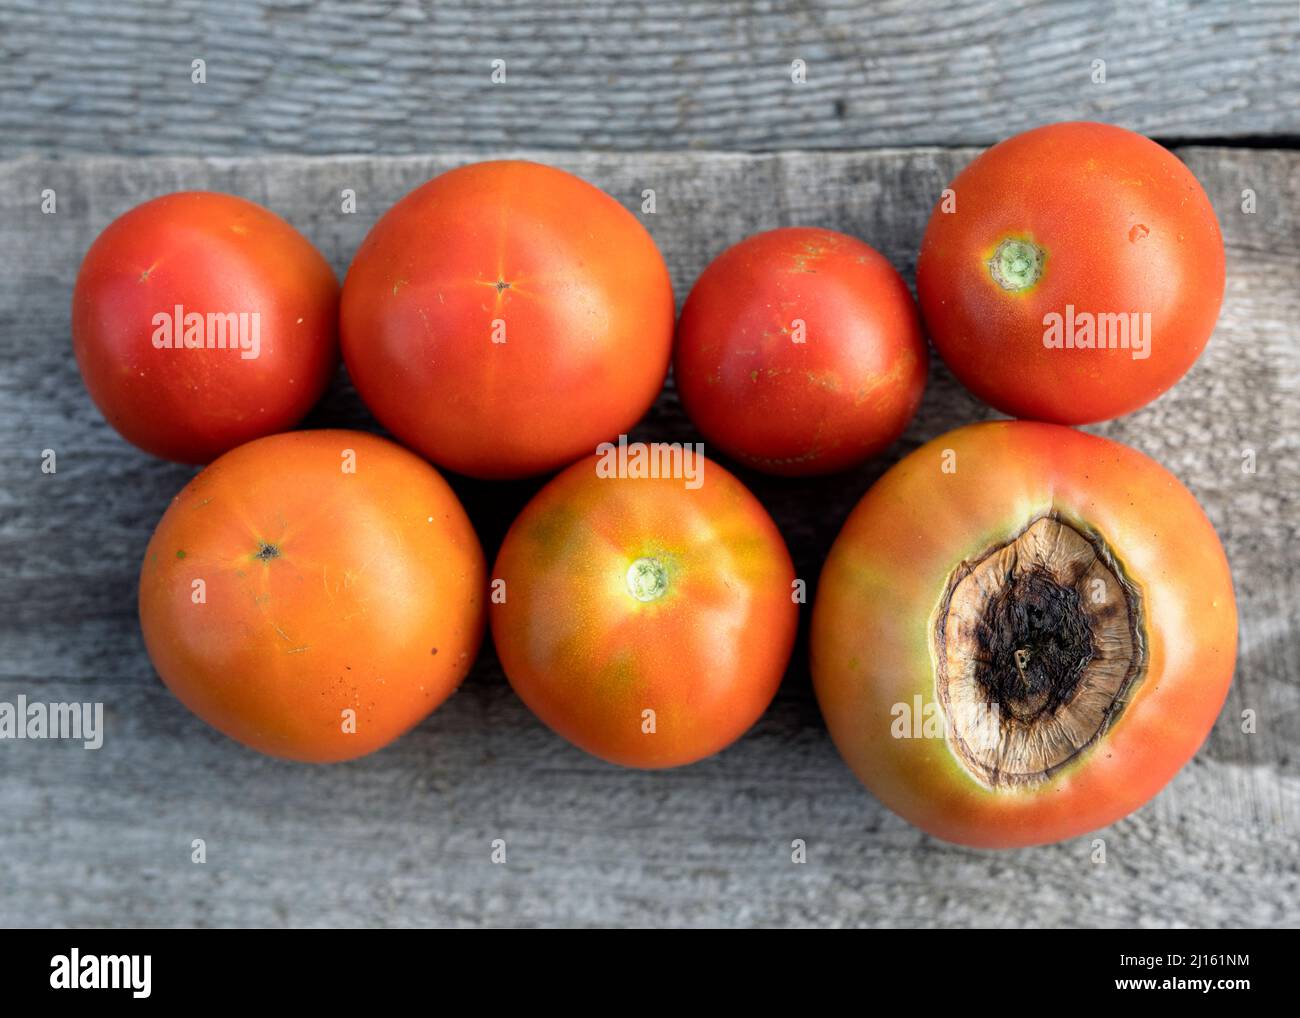 Sick tomato fruit affected by disease vertex rot near ripe red tomatoes on wooden background Stock Photo